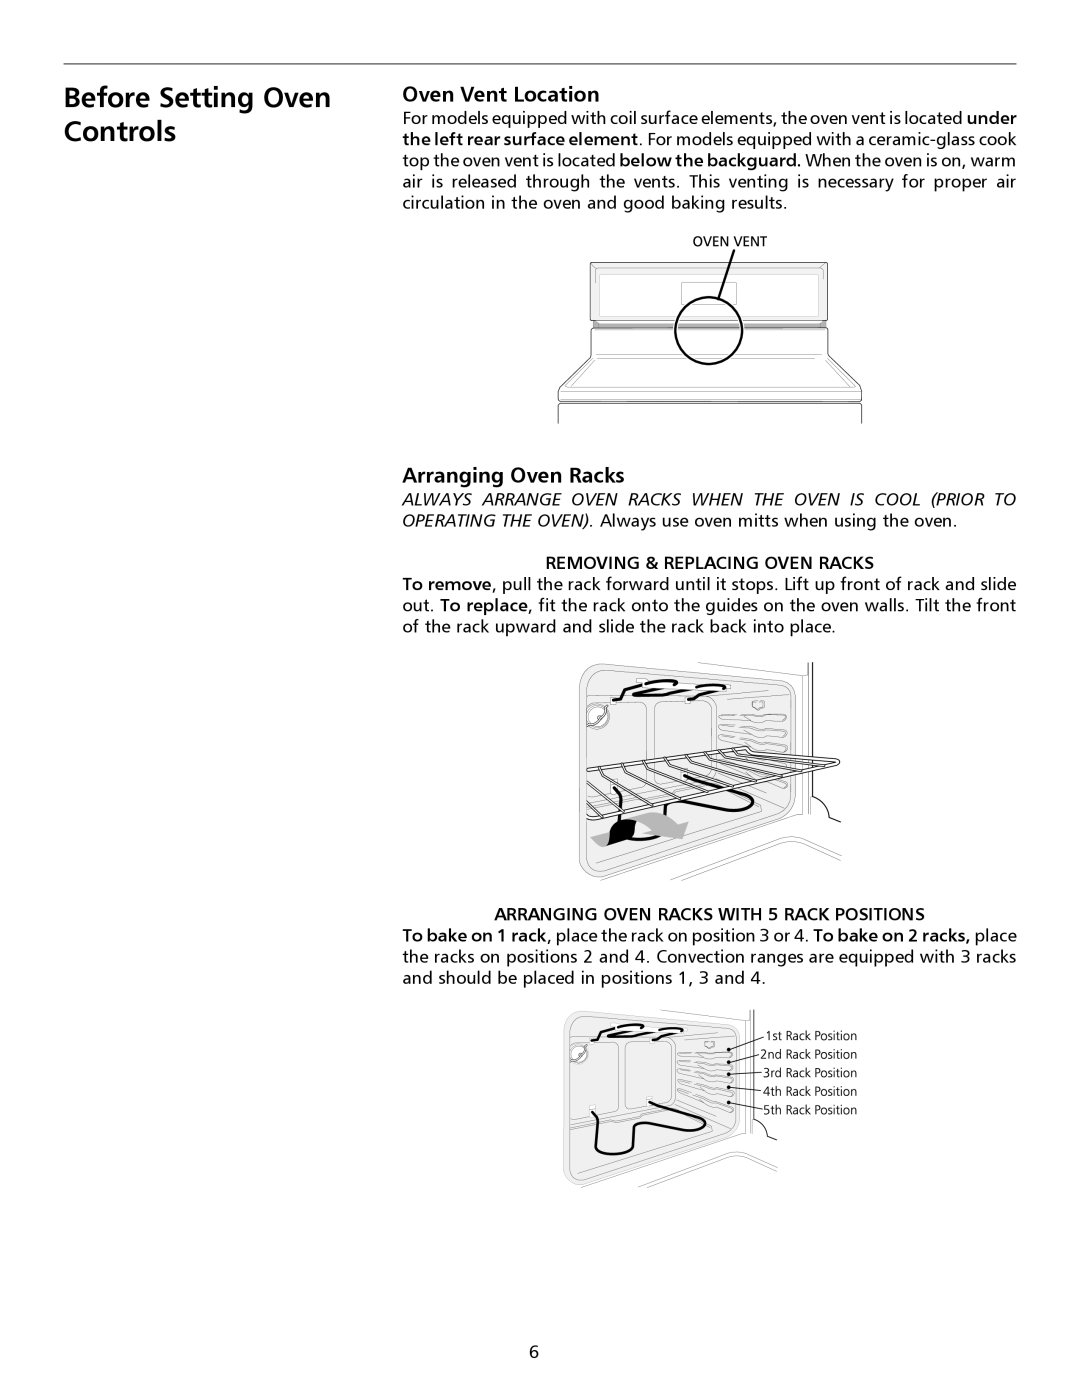 Frigidaire 316135917 important safety instructions Before Setting Oven Controls, Oven Vent Location, Arranging Oven Racks 